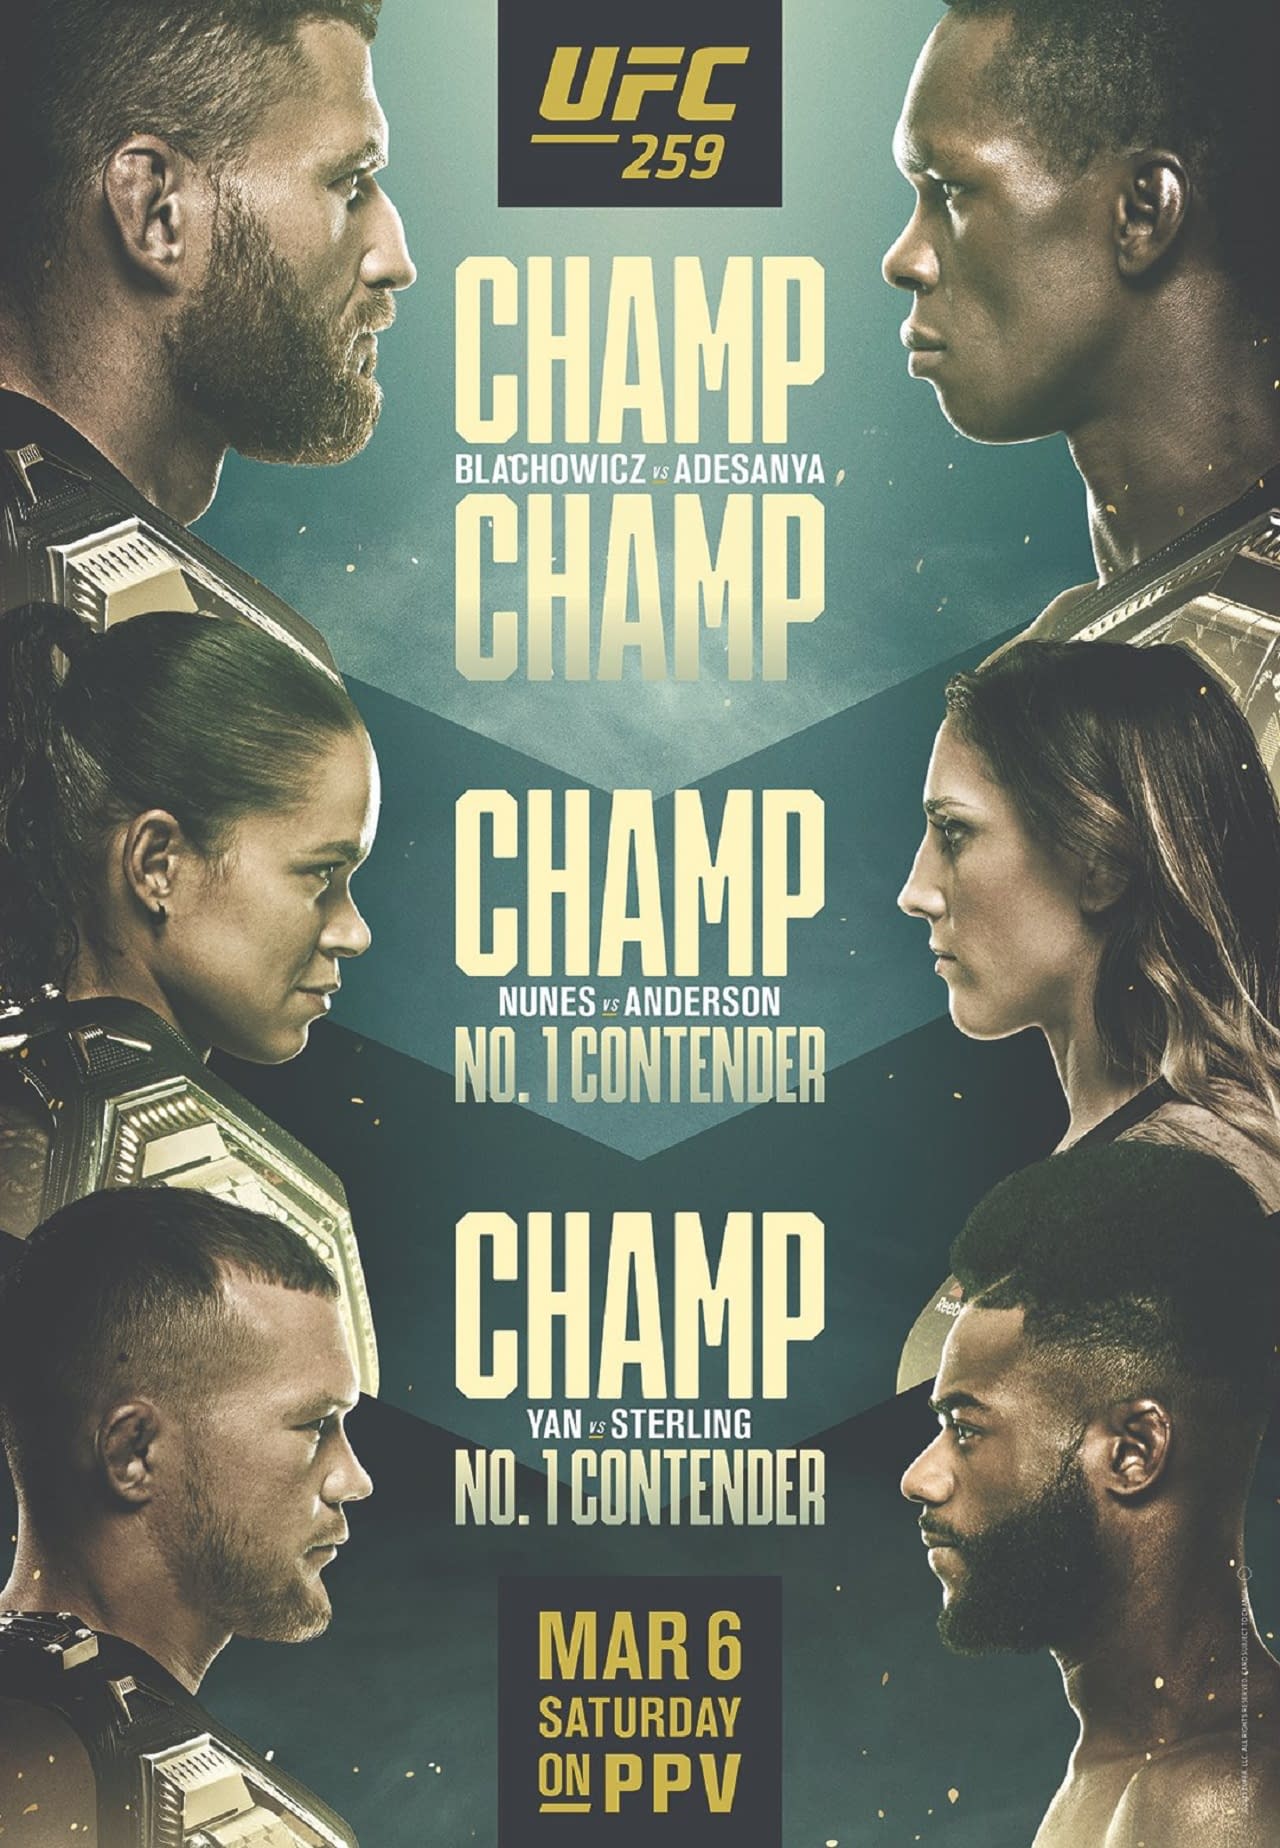 UFC 259 Kicks Off Tonight- Now Heres How to Watch It